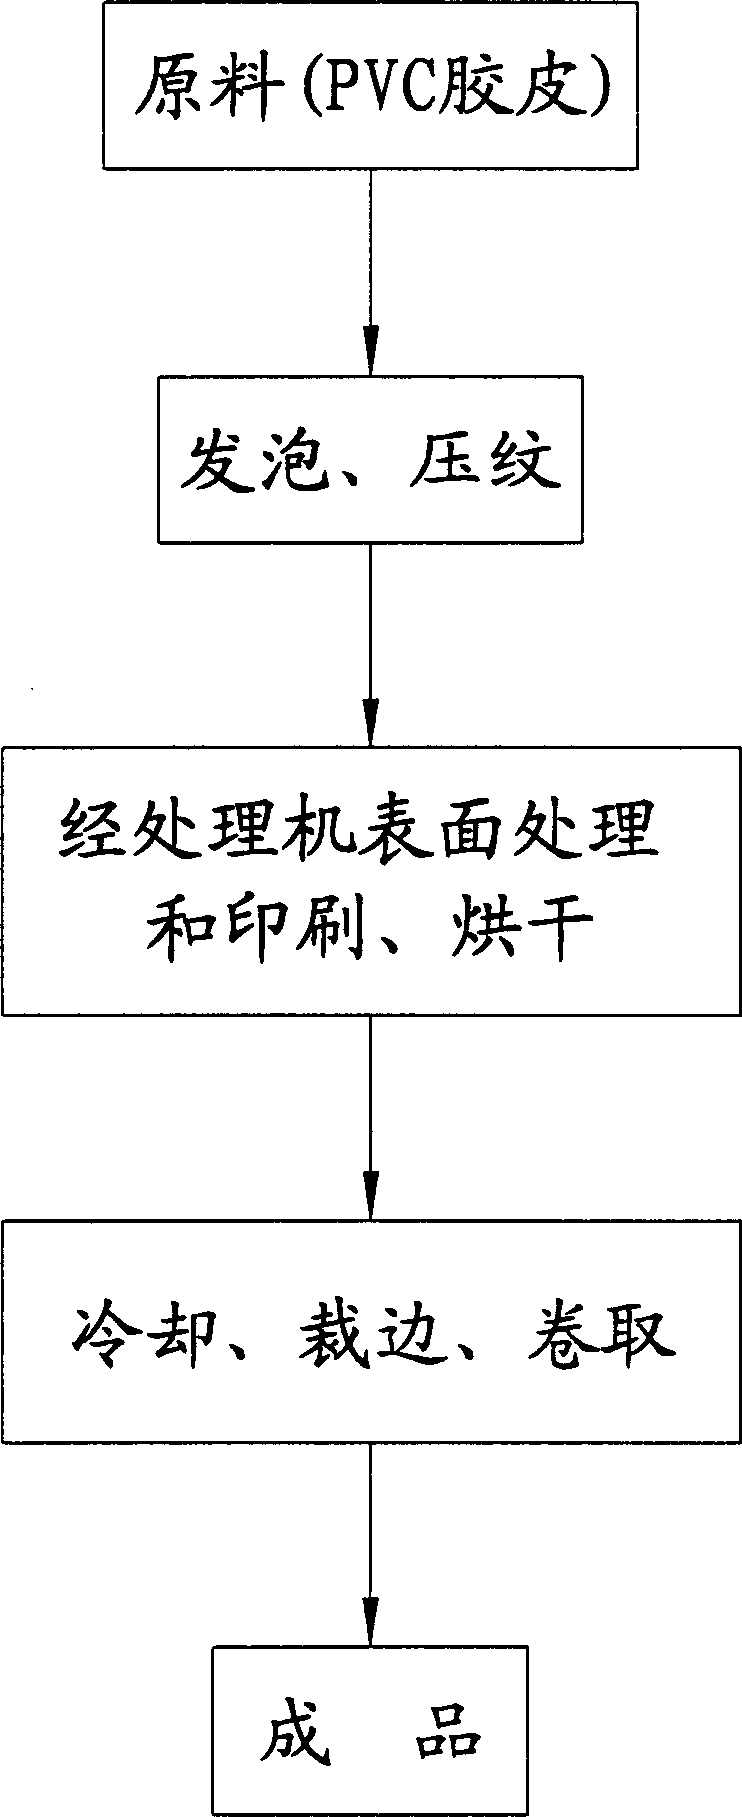 Producing process for ultraviolet fire-retardant resin spraying material for making immitation leather